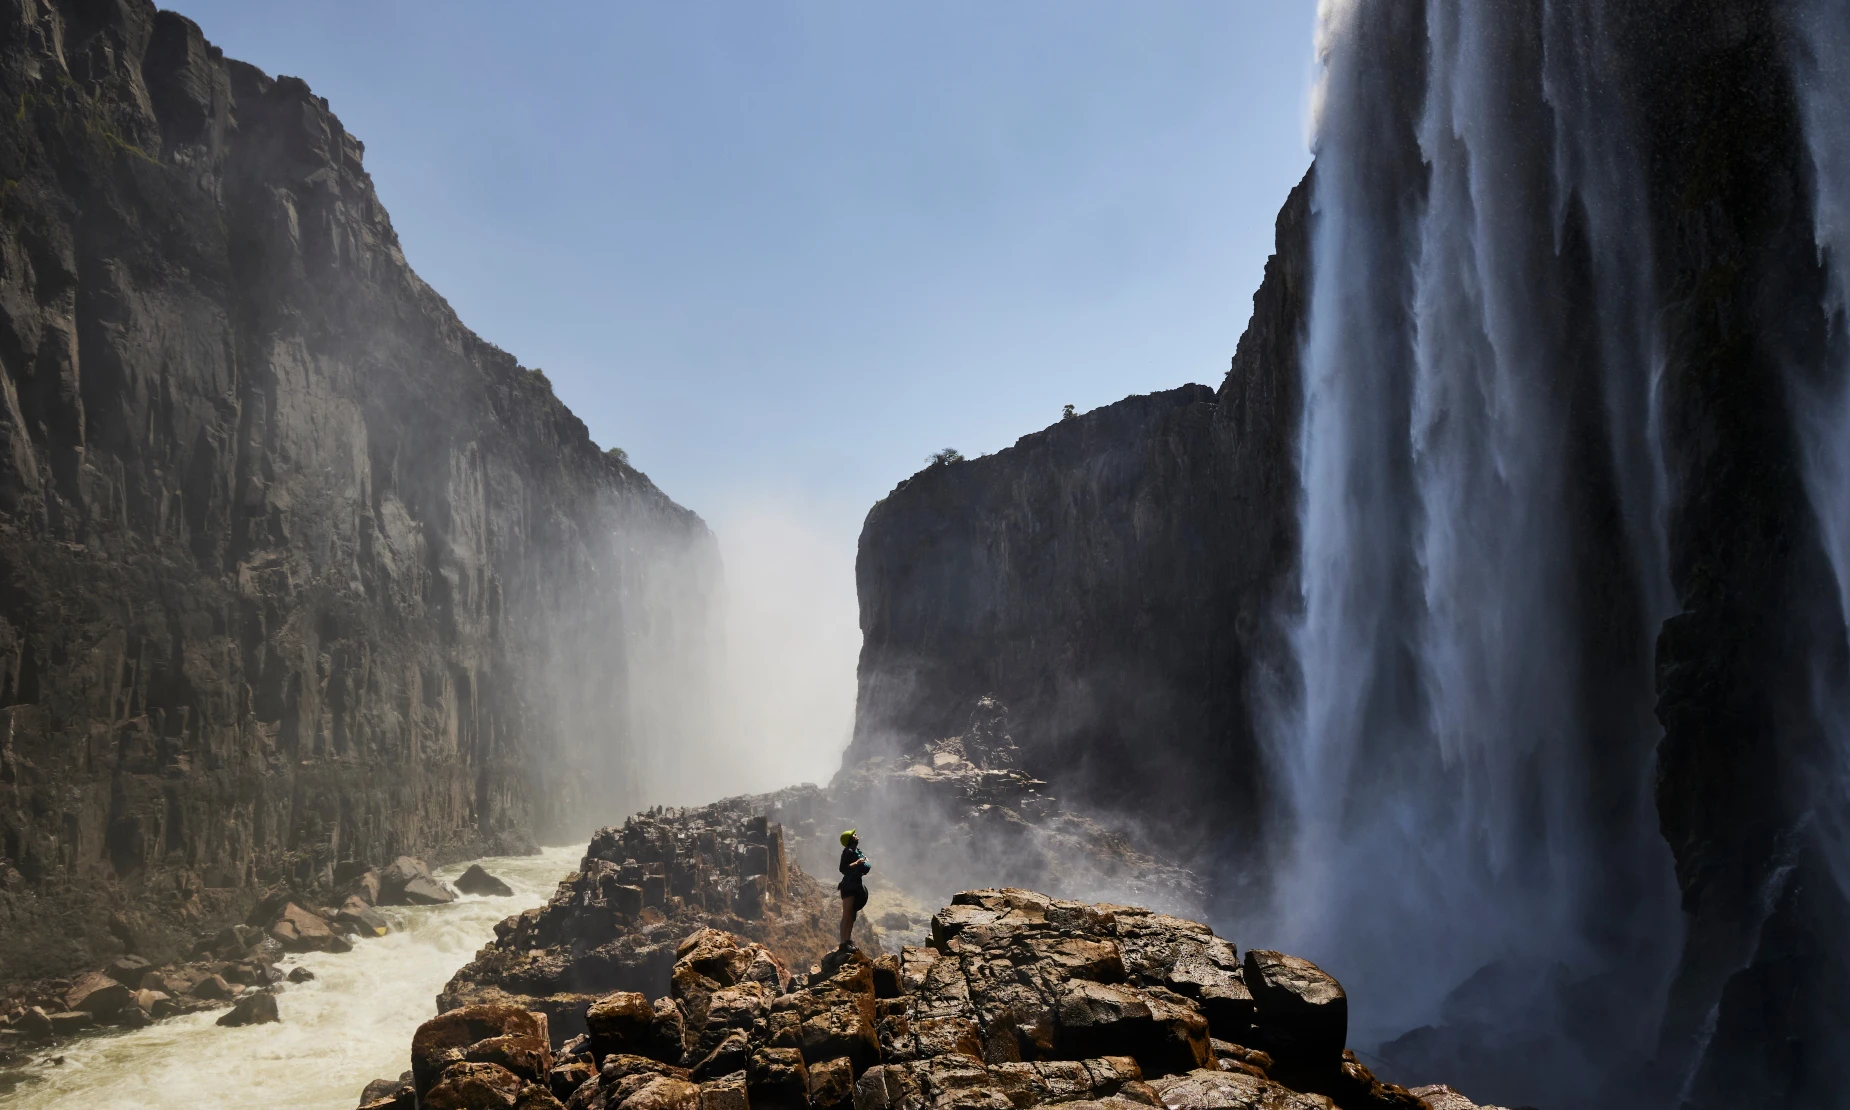 Victoria Falls Gorge - the formation, history, threats